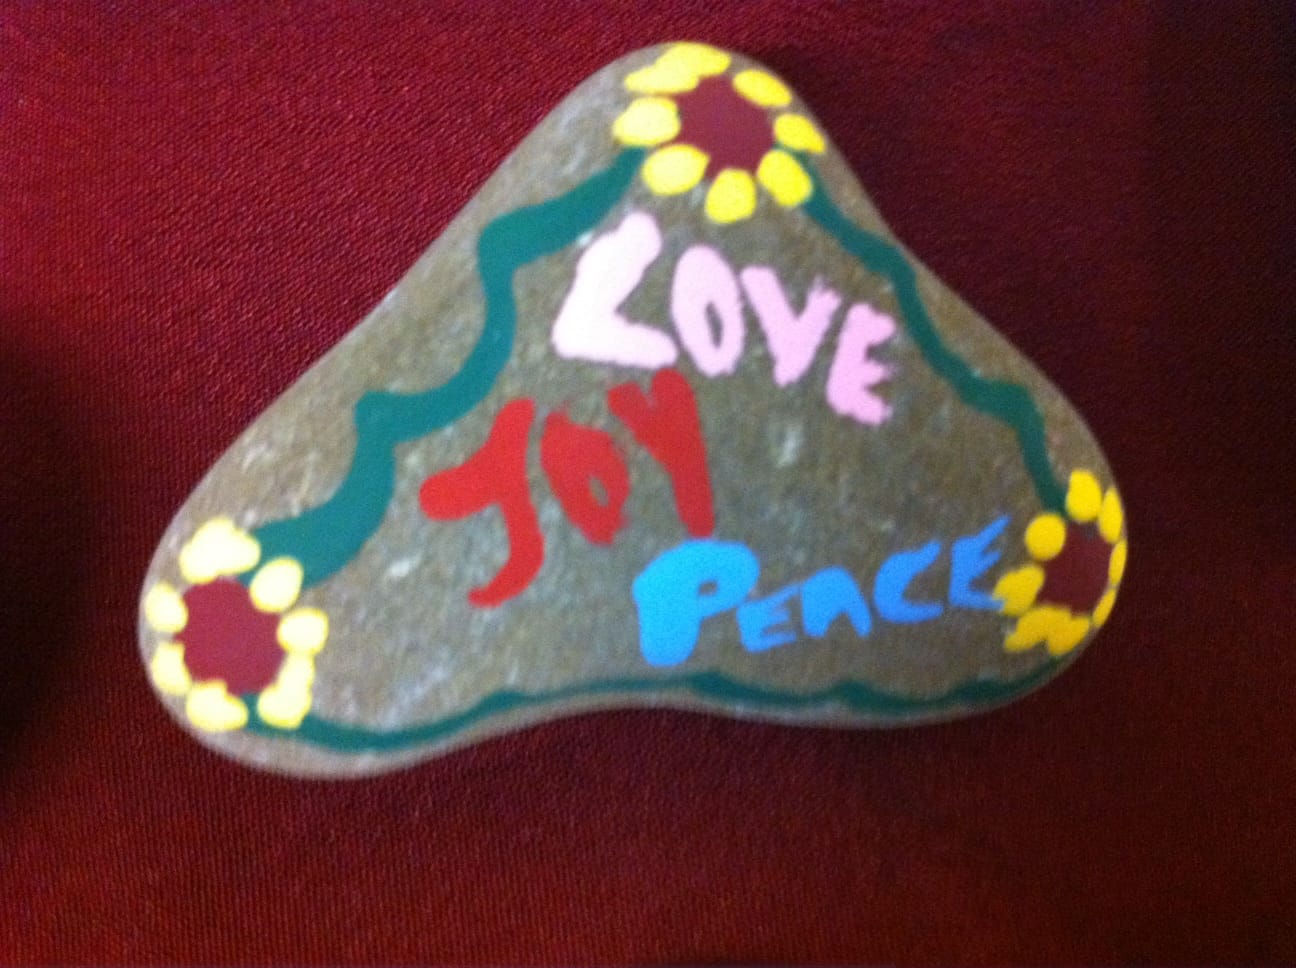 Debbie's Creative Heart - her gift & part of her presentation about Heart Chakra